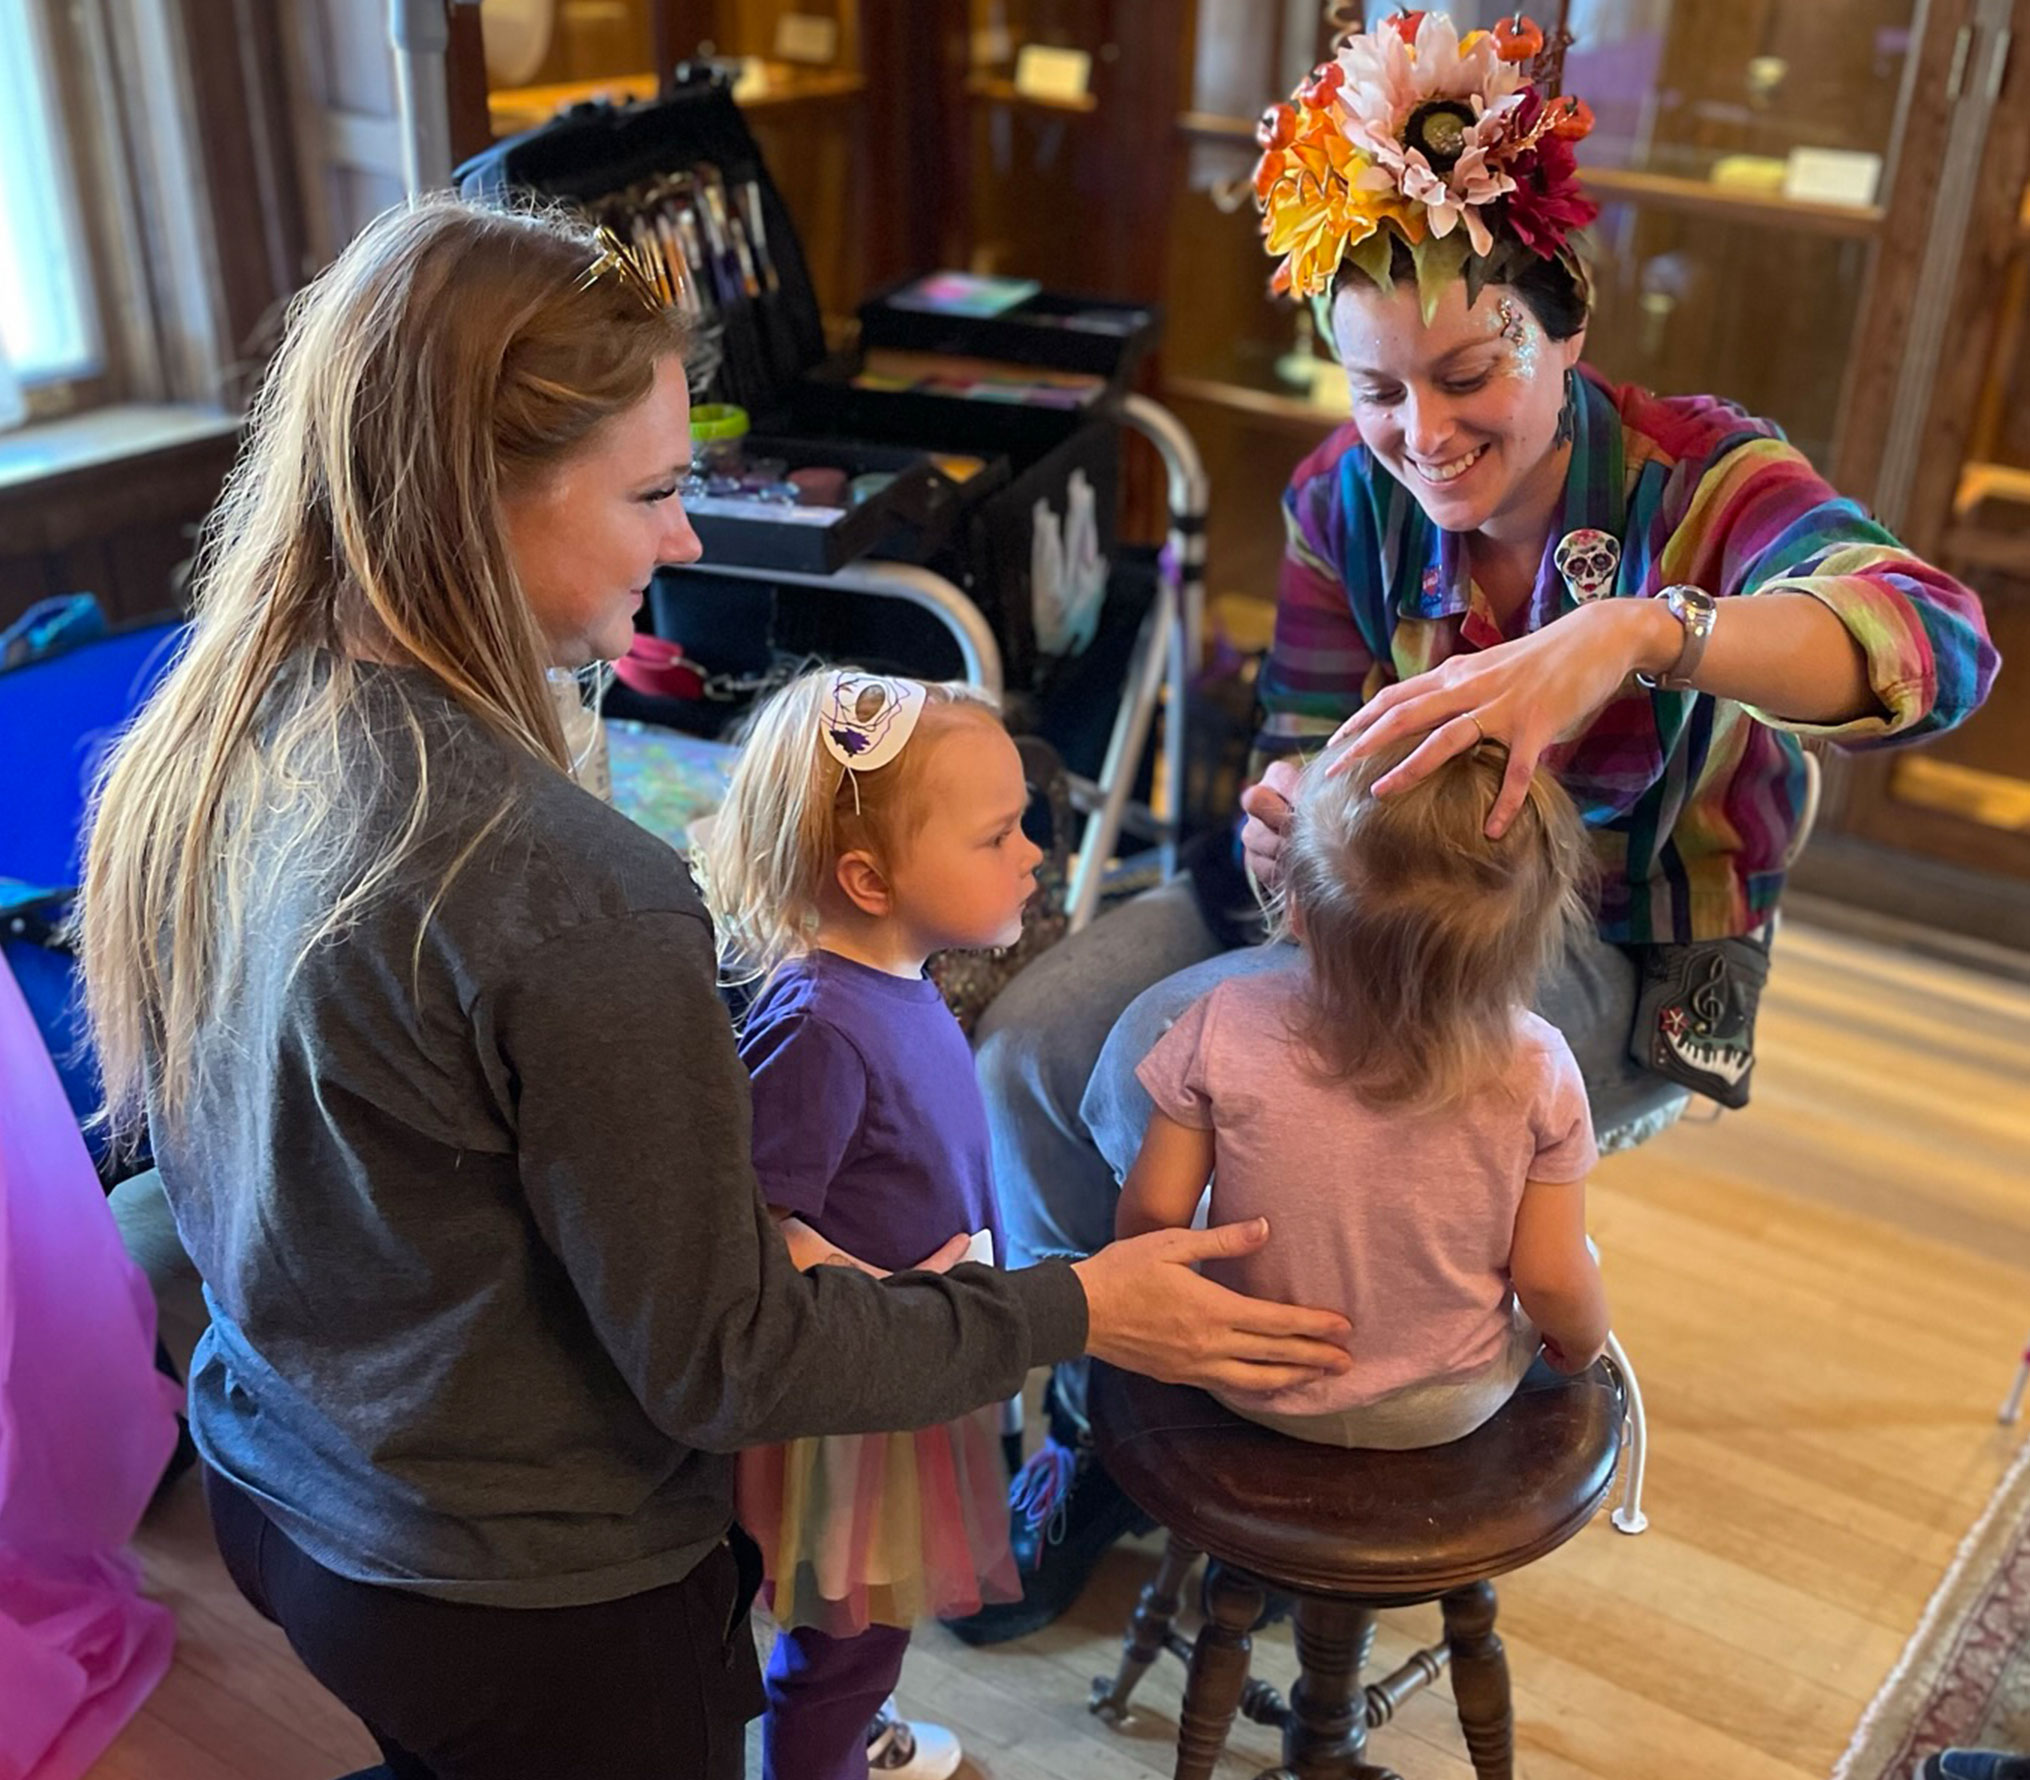 Face painting in the Historic Sawyer Home library